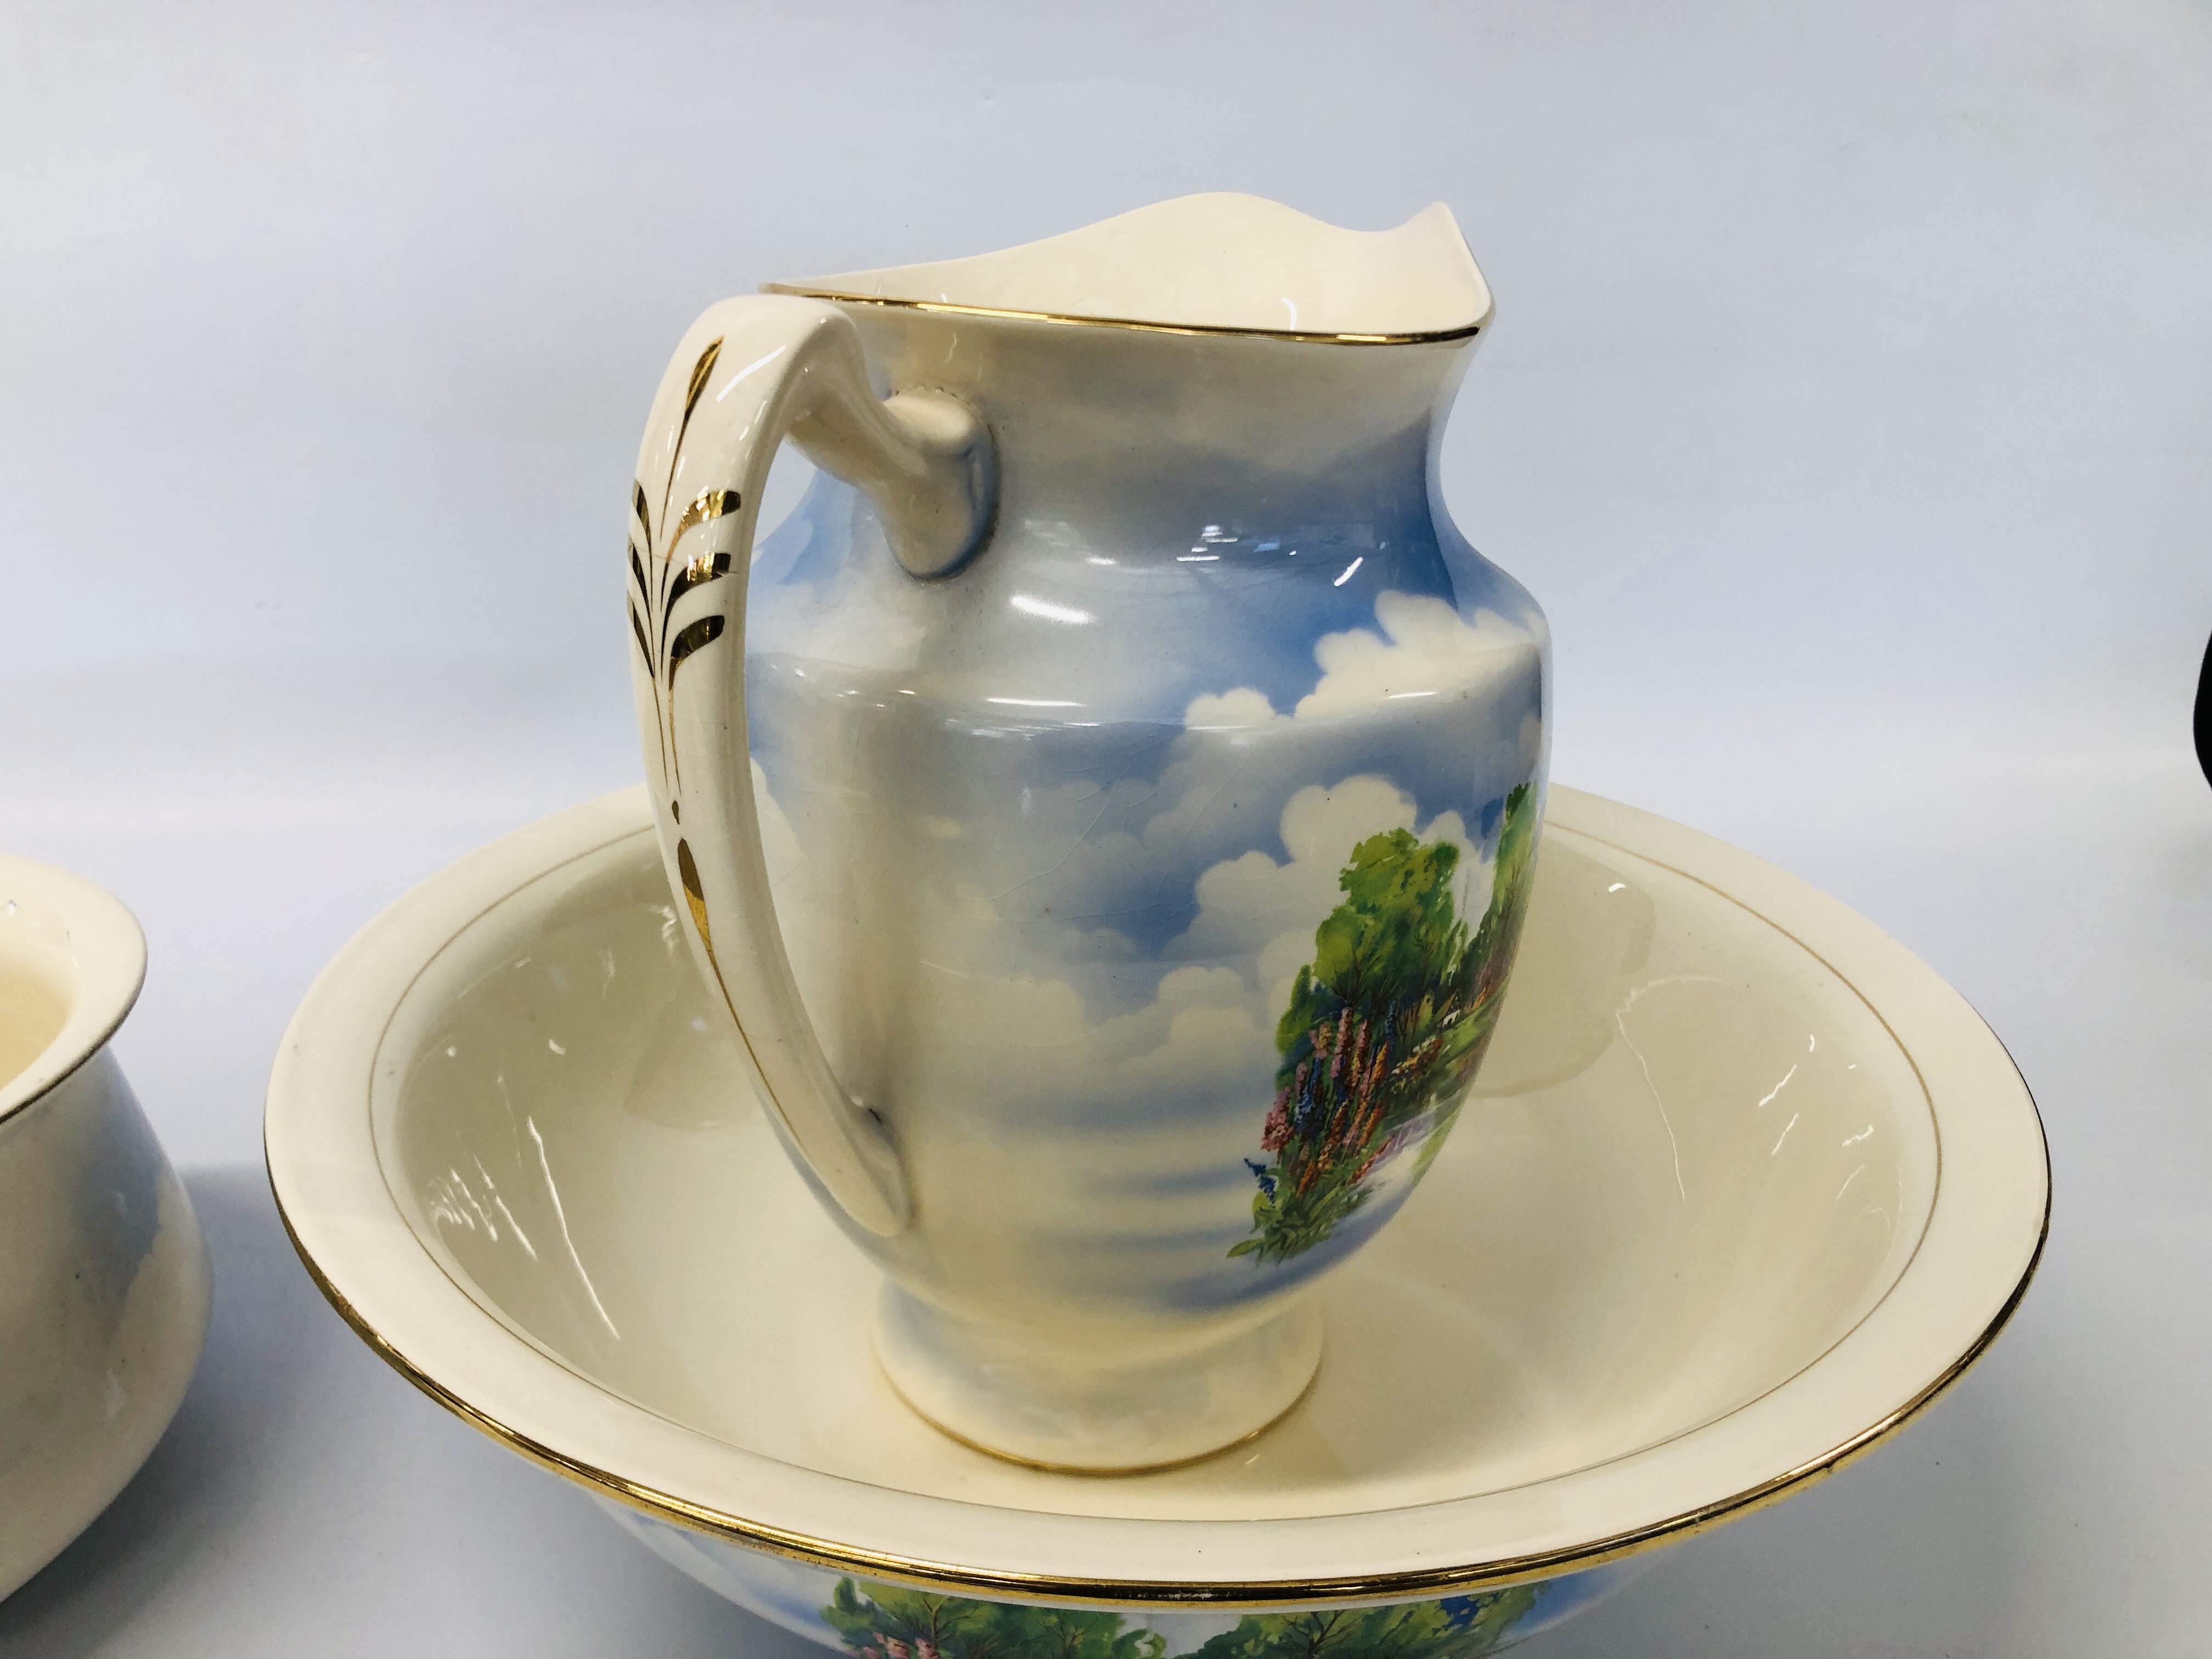 A VINTAGE FALCON WARE DECORATED WASH JUG AND BOWL SET ALONG WITH MATCHING VASE AND CHAMBER POT. - Image 8 of 10